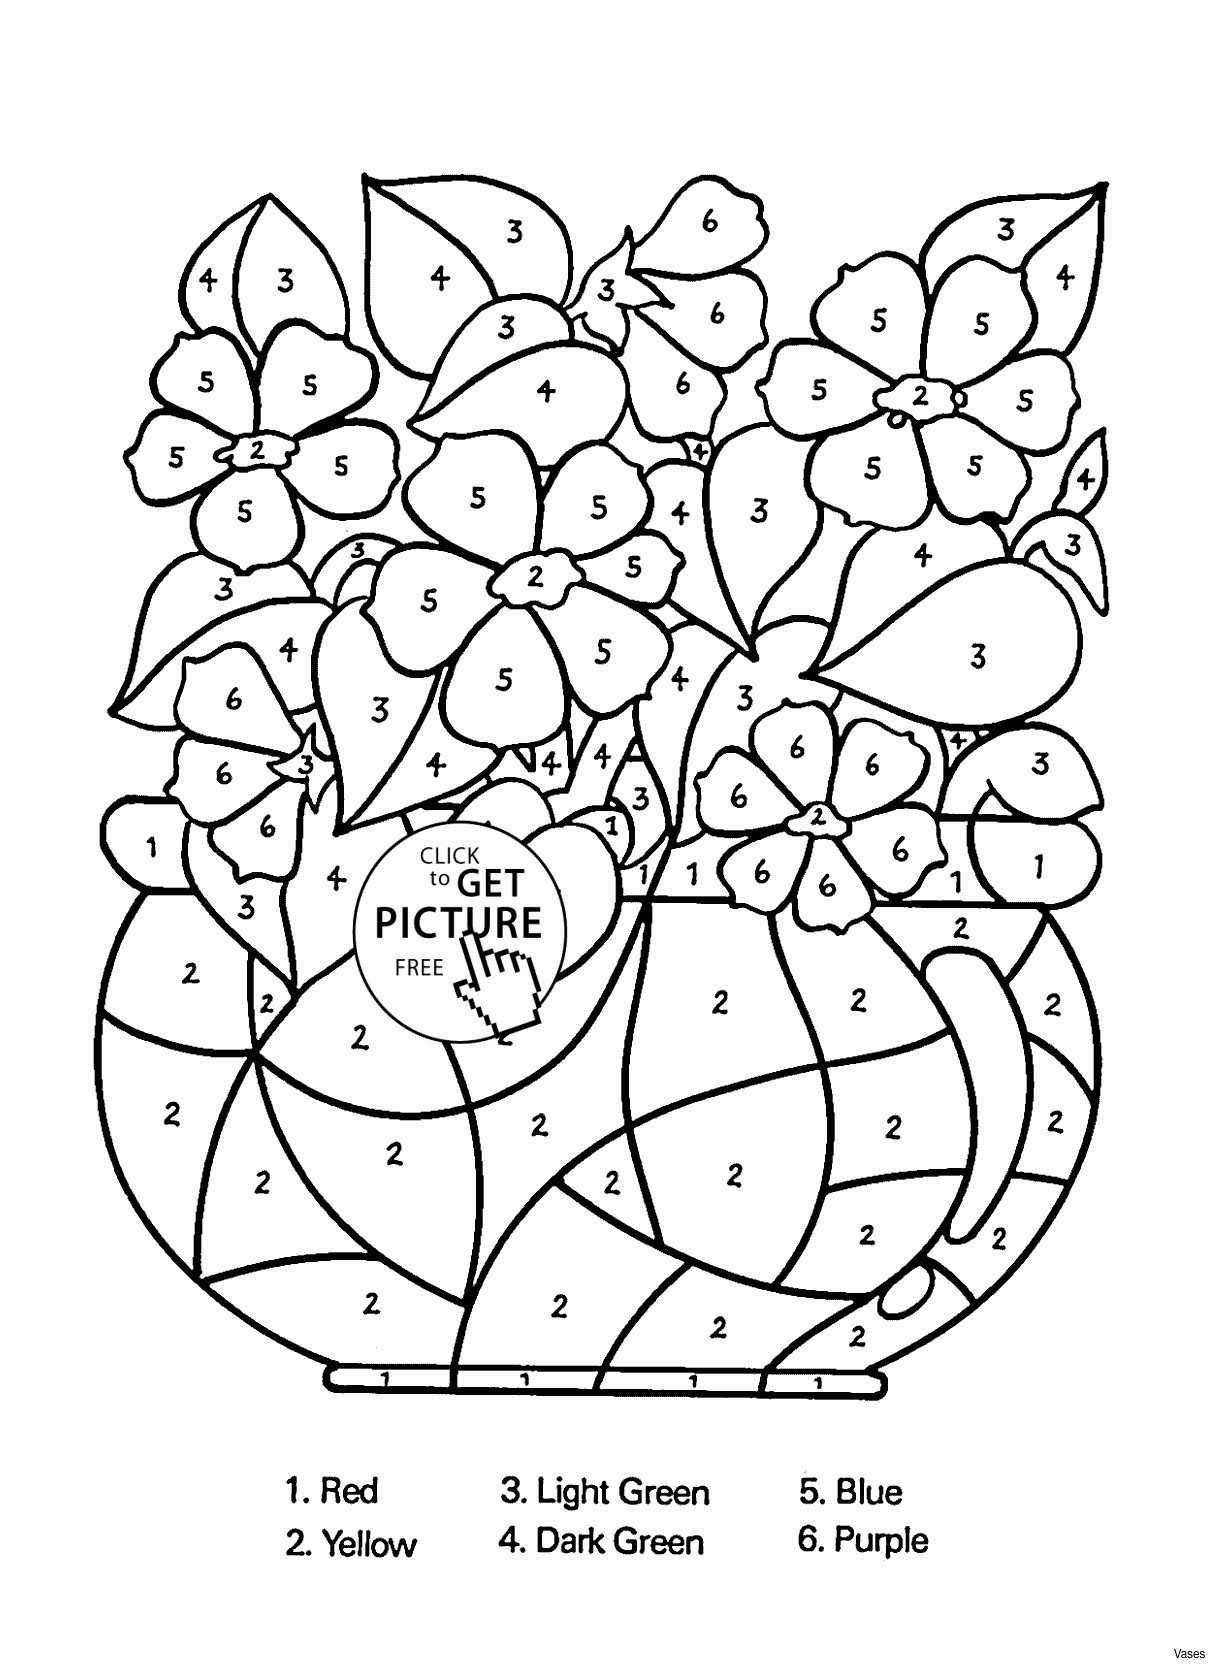 Green Beans Coloring Page Inspirational Flower Cute Coloring Pages Jvzooreview